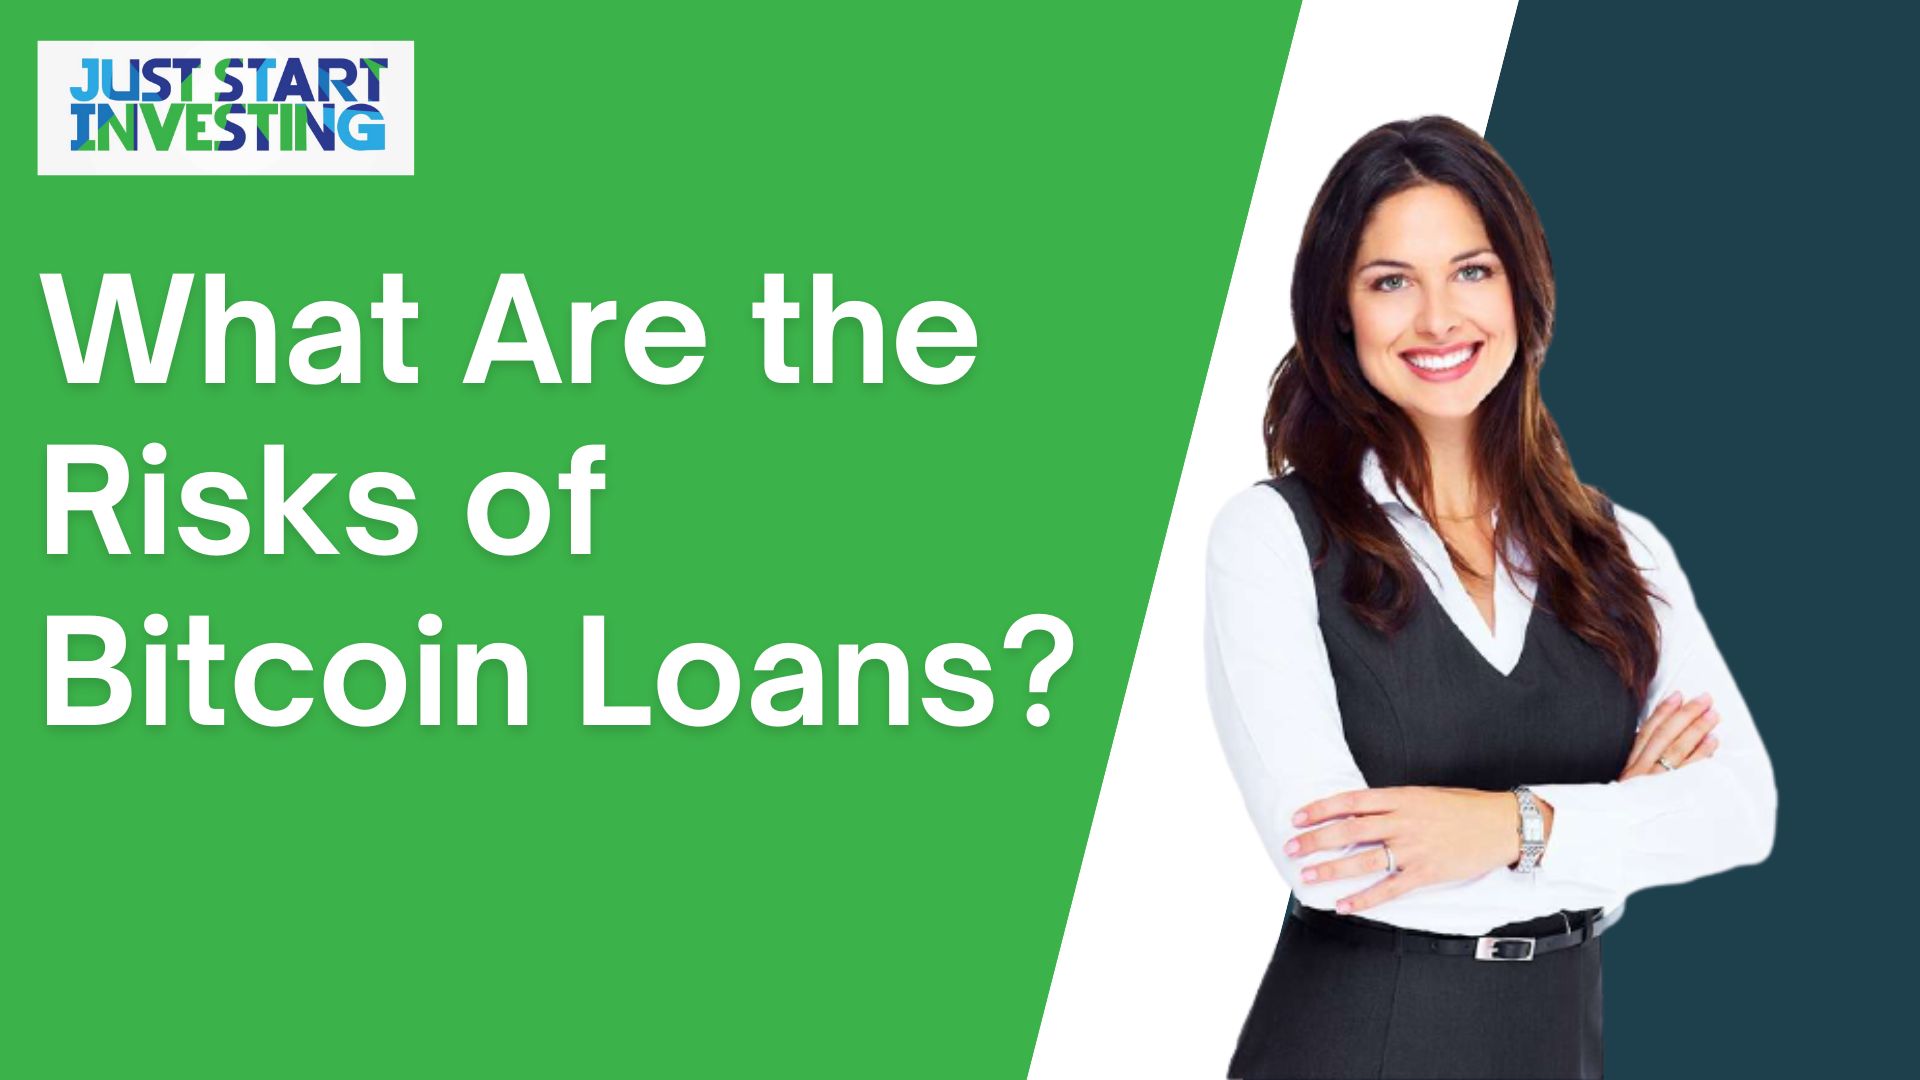 What Are the Risks of Bitcoin Loans